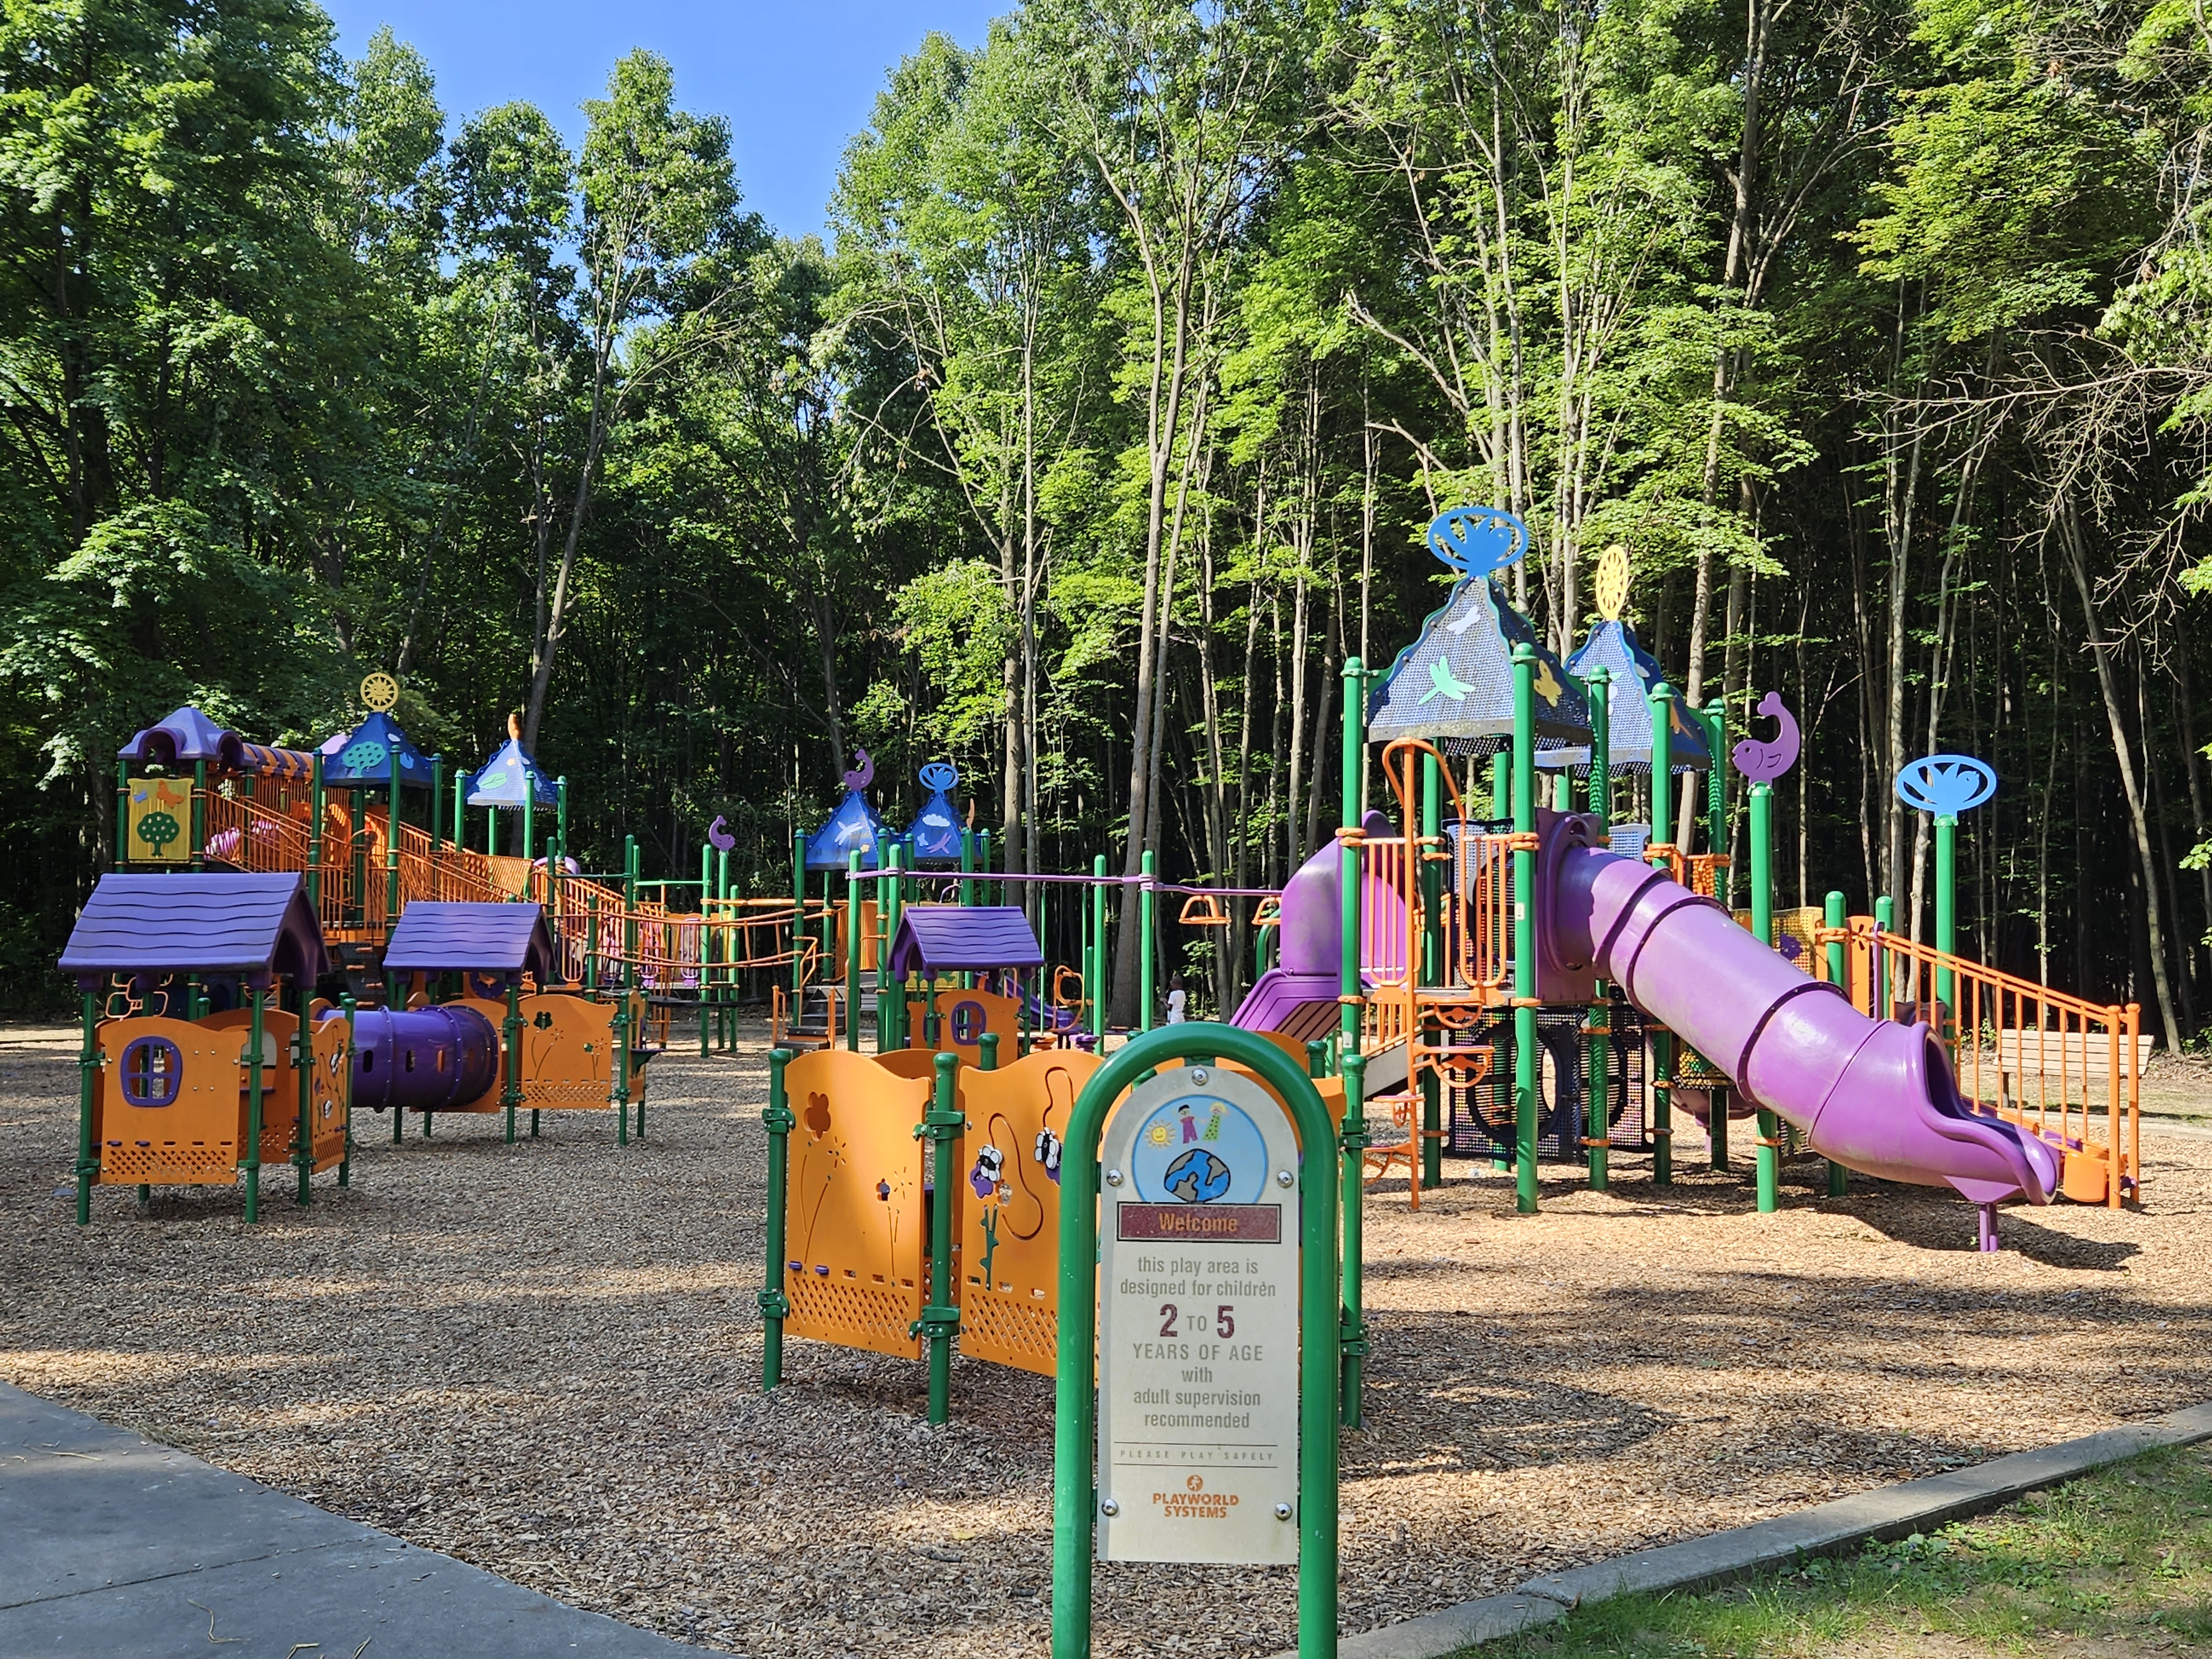 Brightly colored play equipment at Bauervic Woods Park